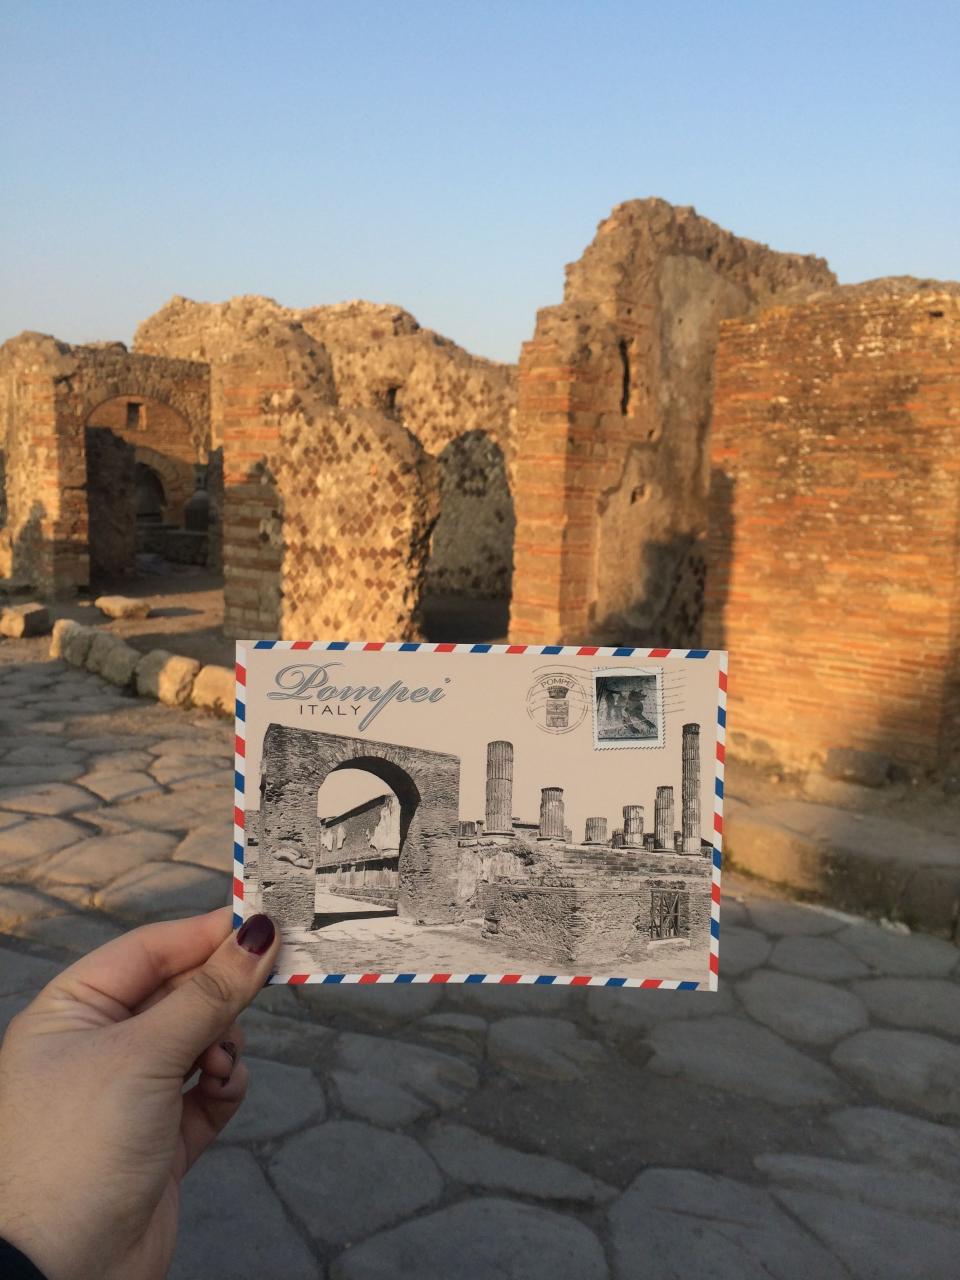 A hand holding up a Pompeii postcard in front of the actual ruins